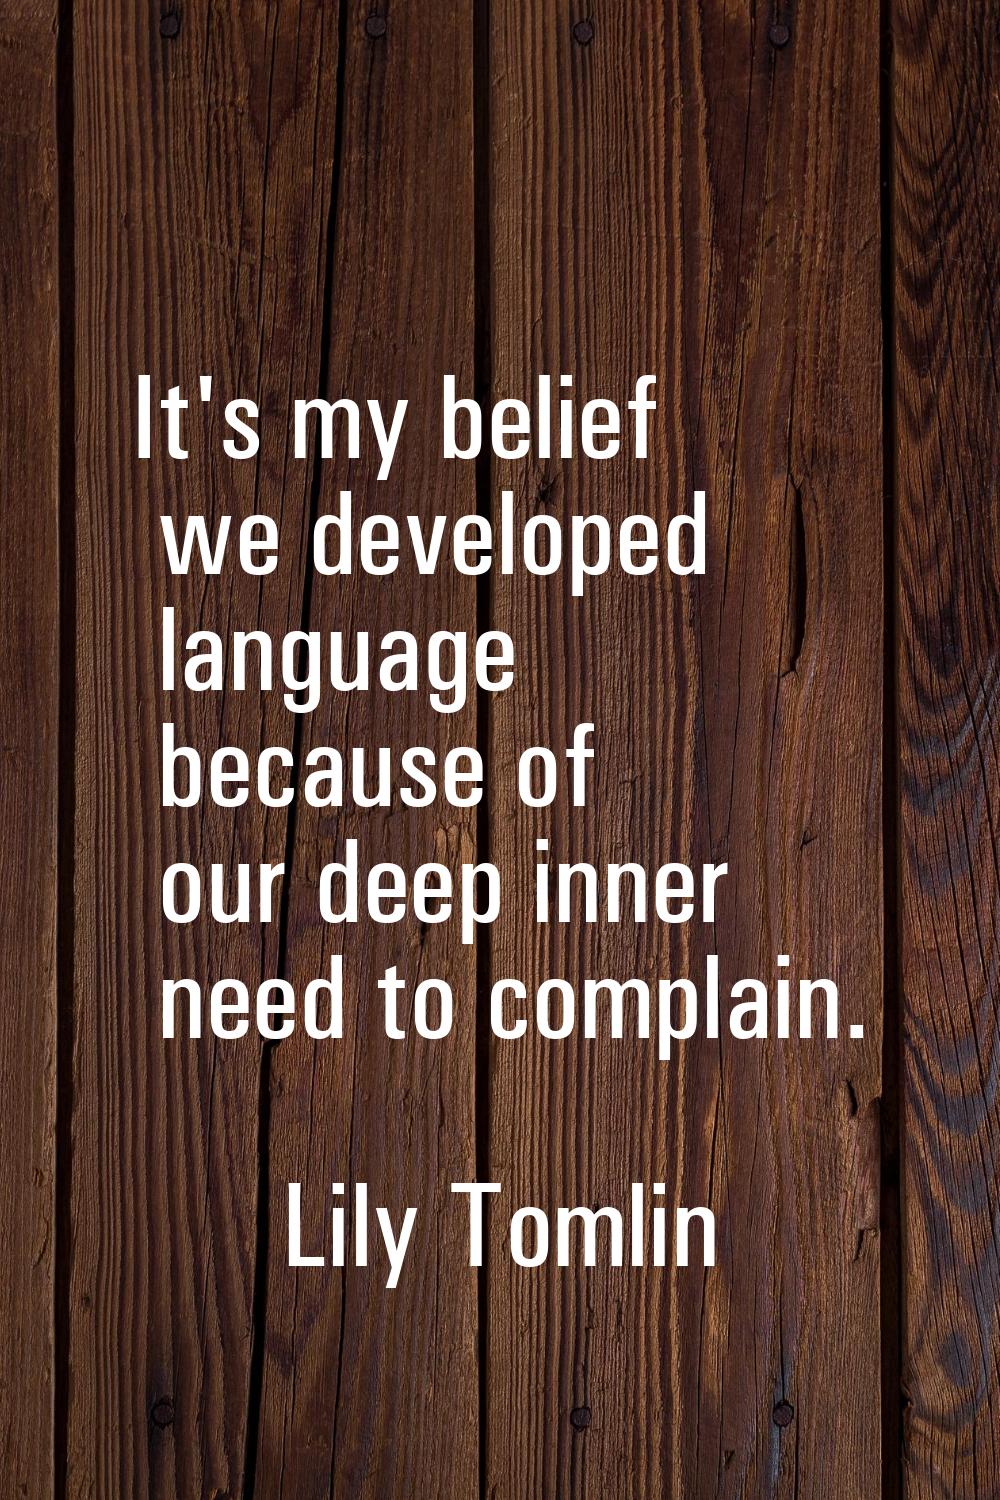 It's my belief we developed language because of our deep inner need to complain.